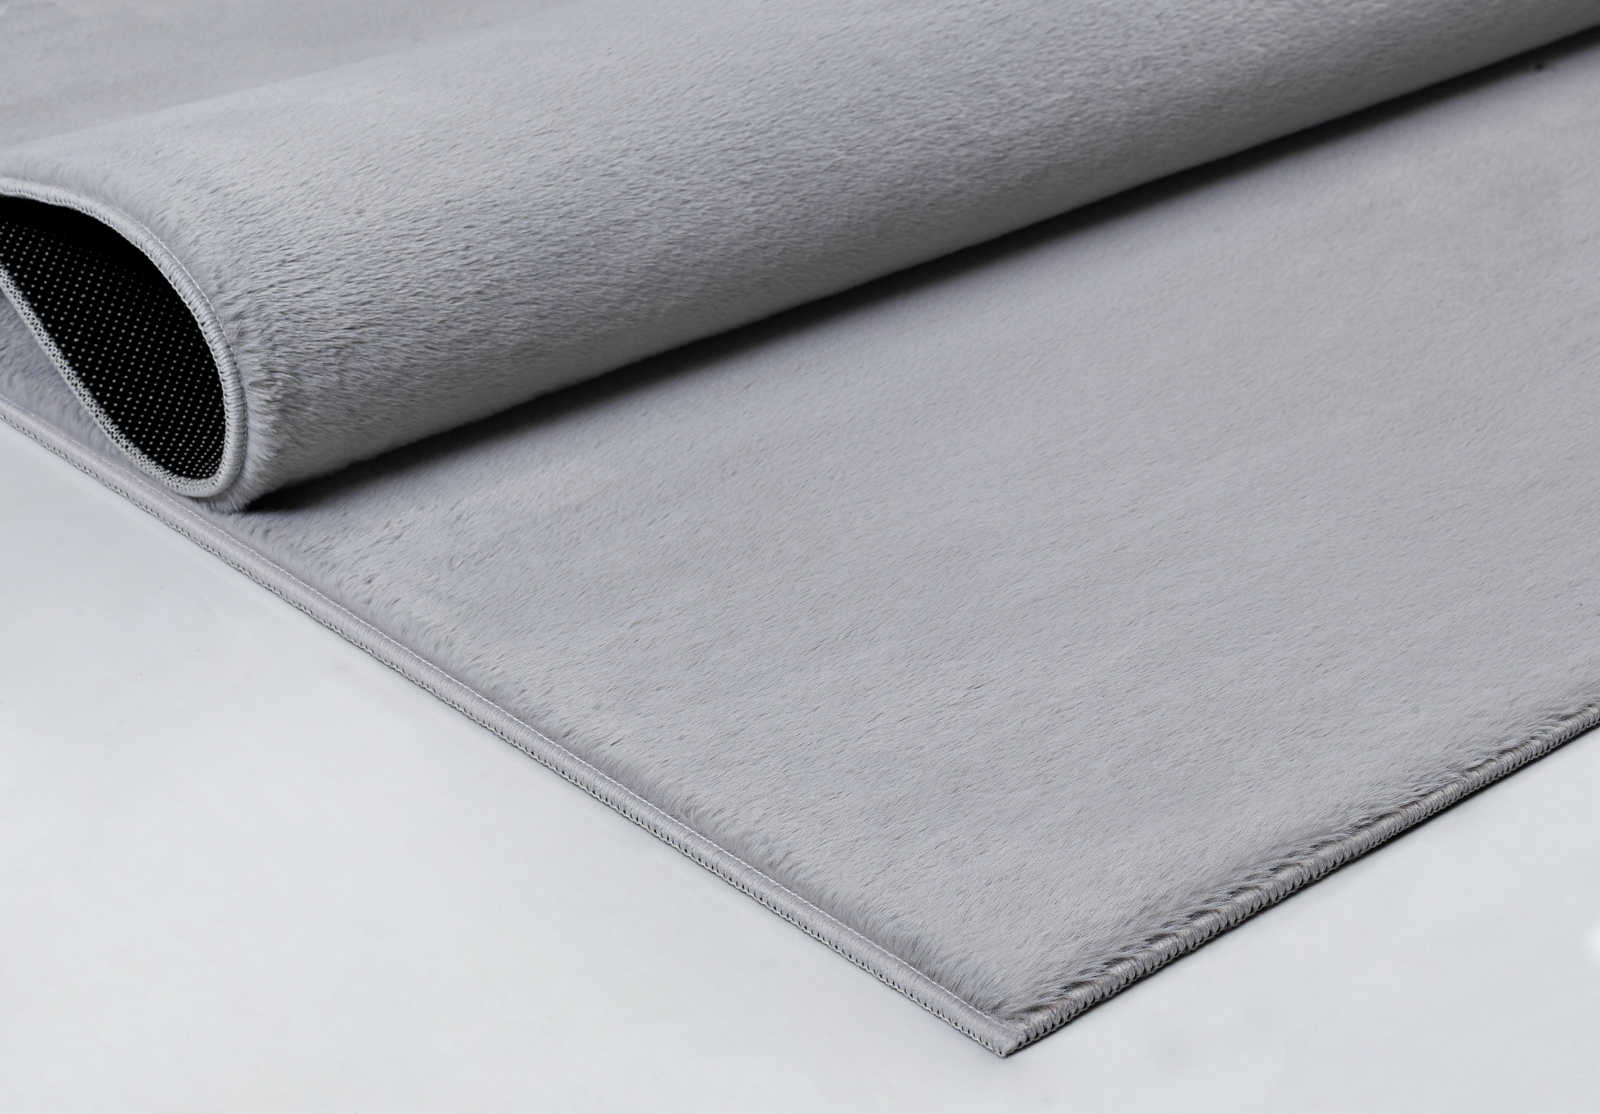             Comfortable high pile carpet in soft grey - 280 x 200 cm
        